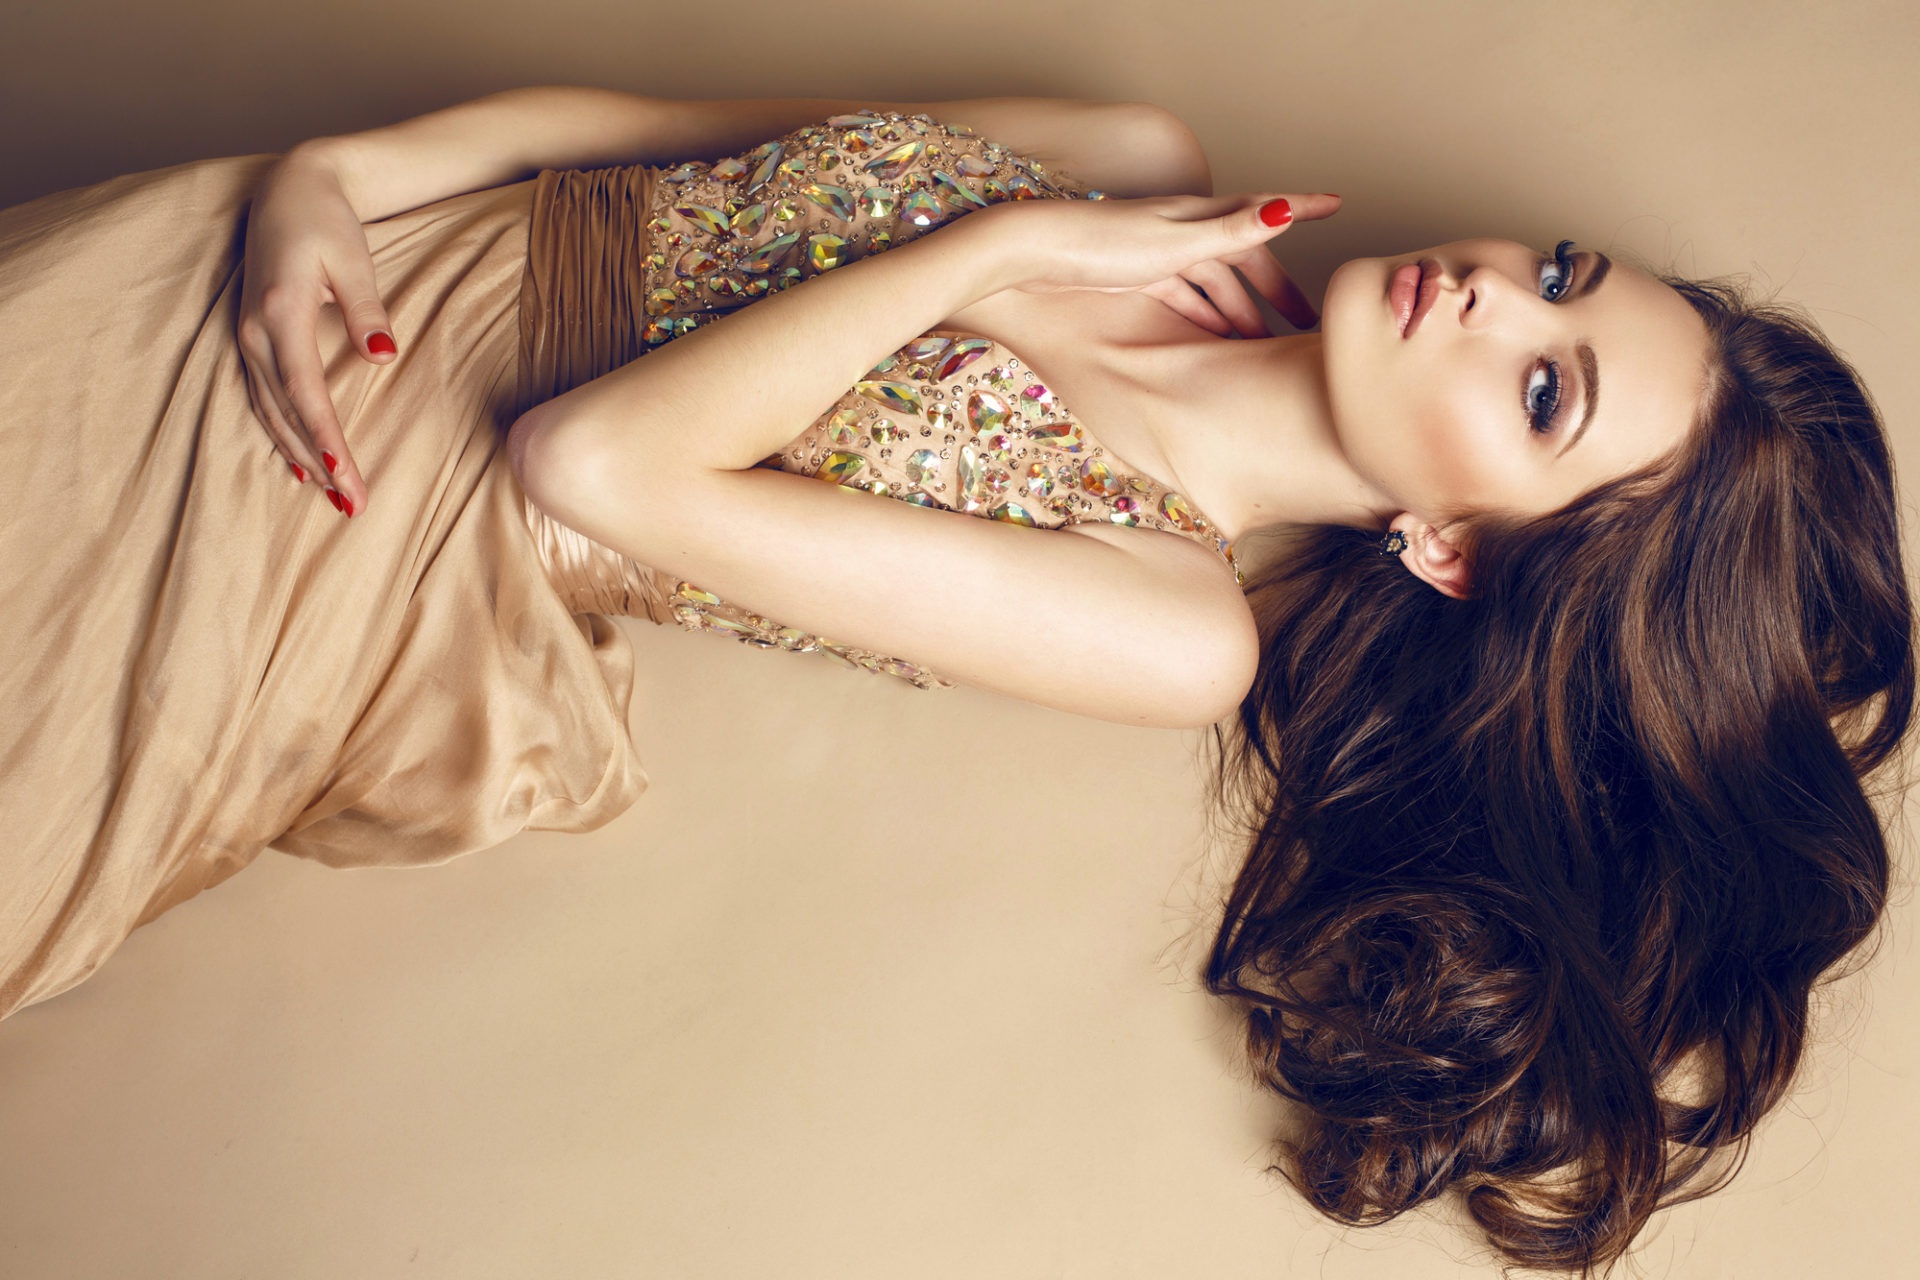 Model Red Lipstick Painted Nails Brown Dress Long Hair Lying Down Looking At Viewer Studio Blue Eyes 1920x1280